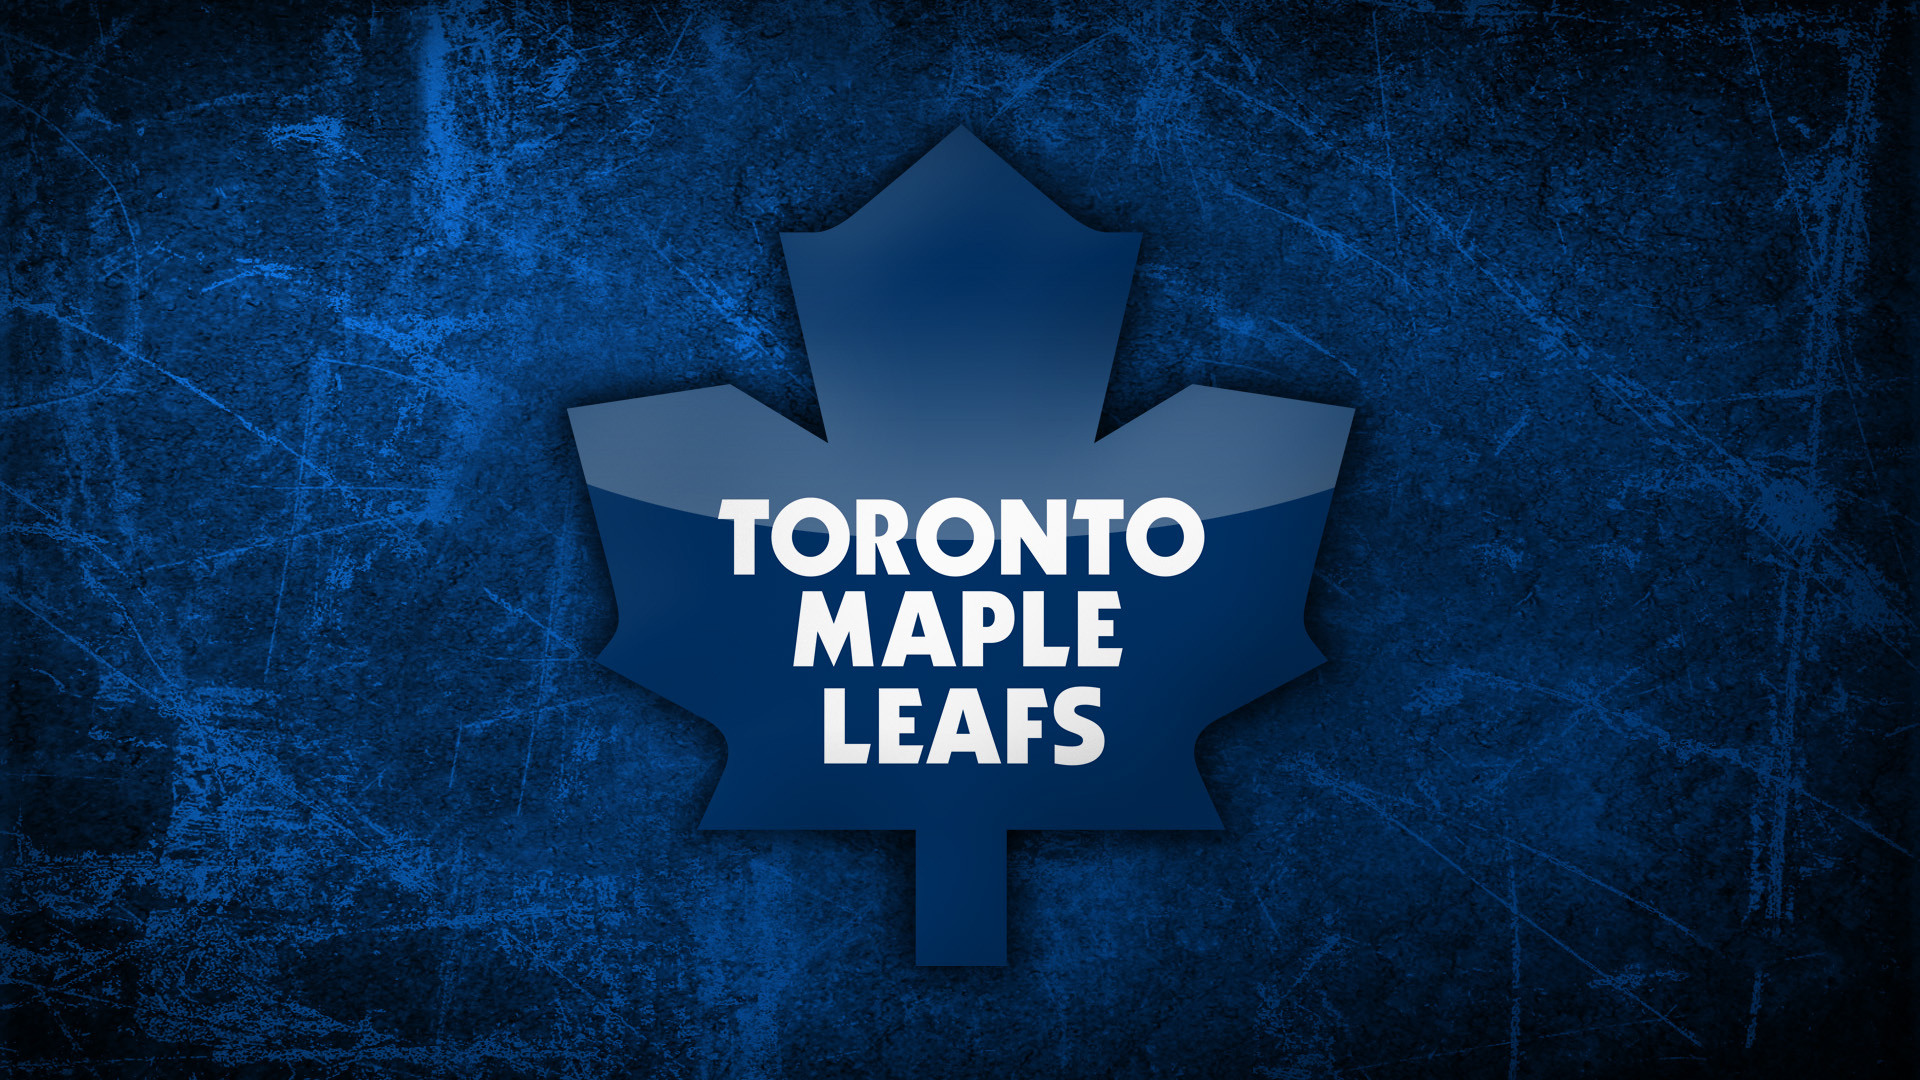 Toronto Maple Leafs Wallpapers - Top 20 Best Toronto Maple Leafs Wallpapers  [ HQ ]